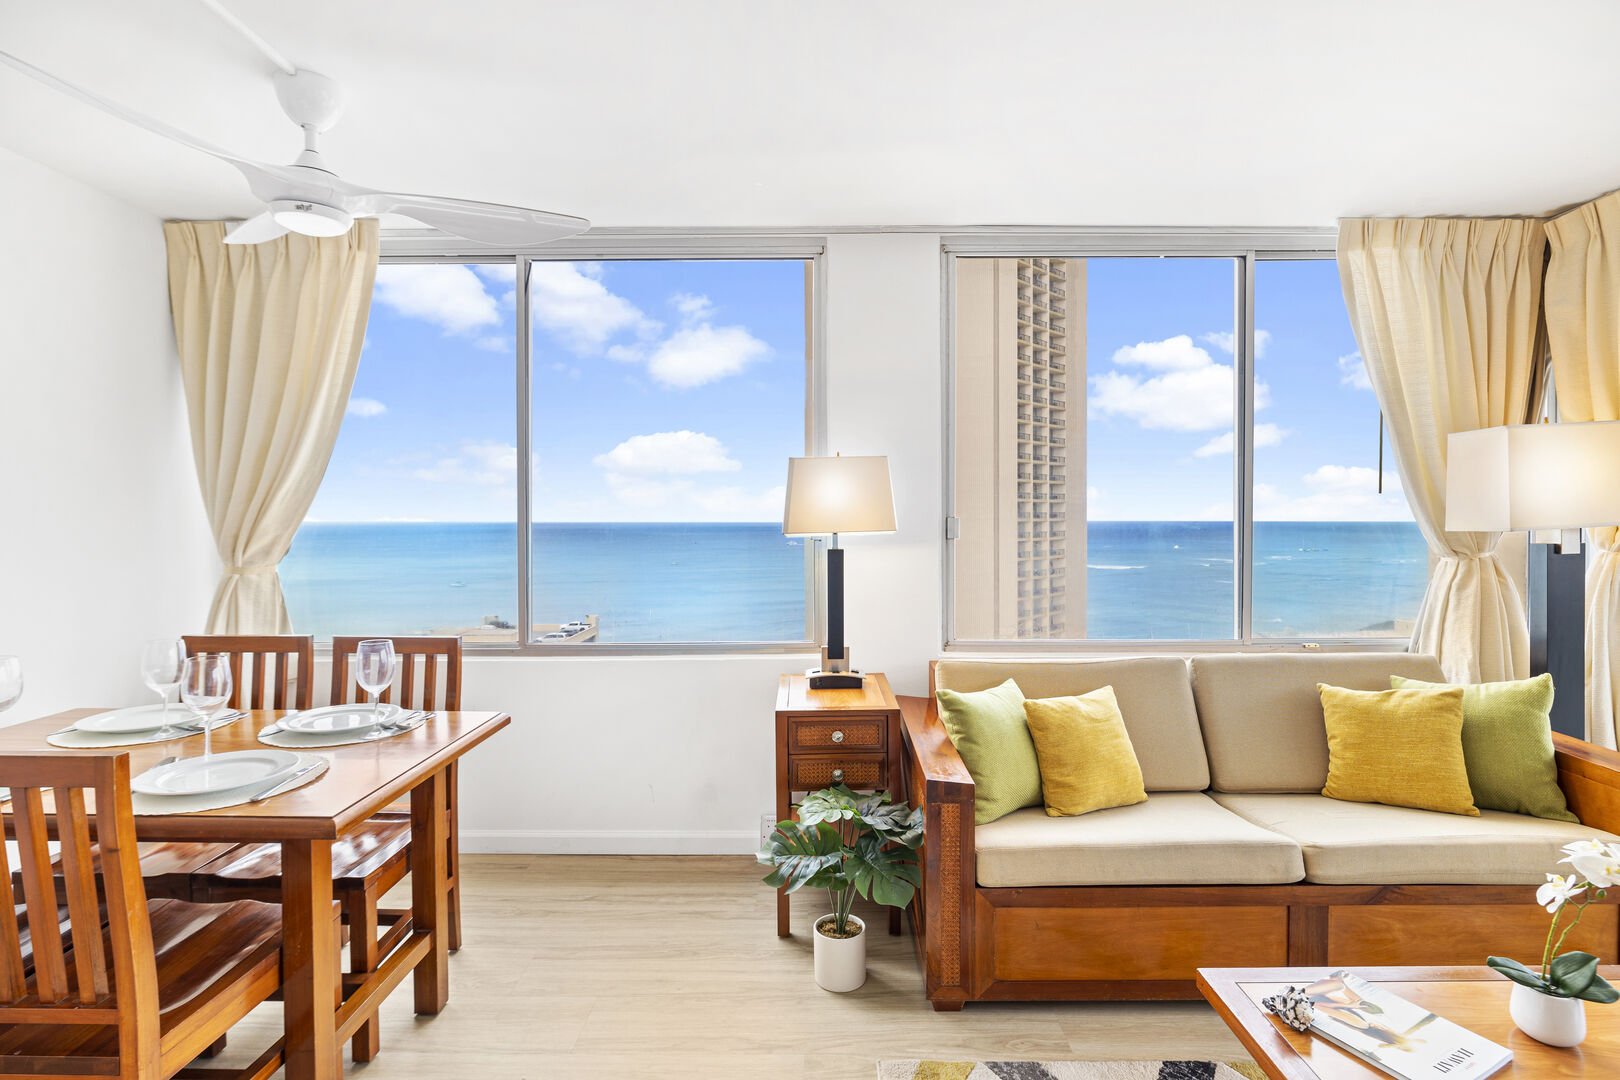 Beautiful Ocean View from the living room